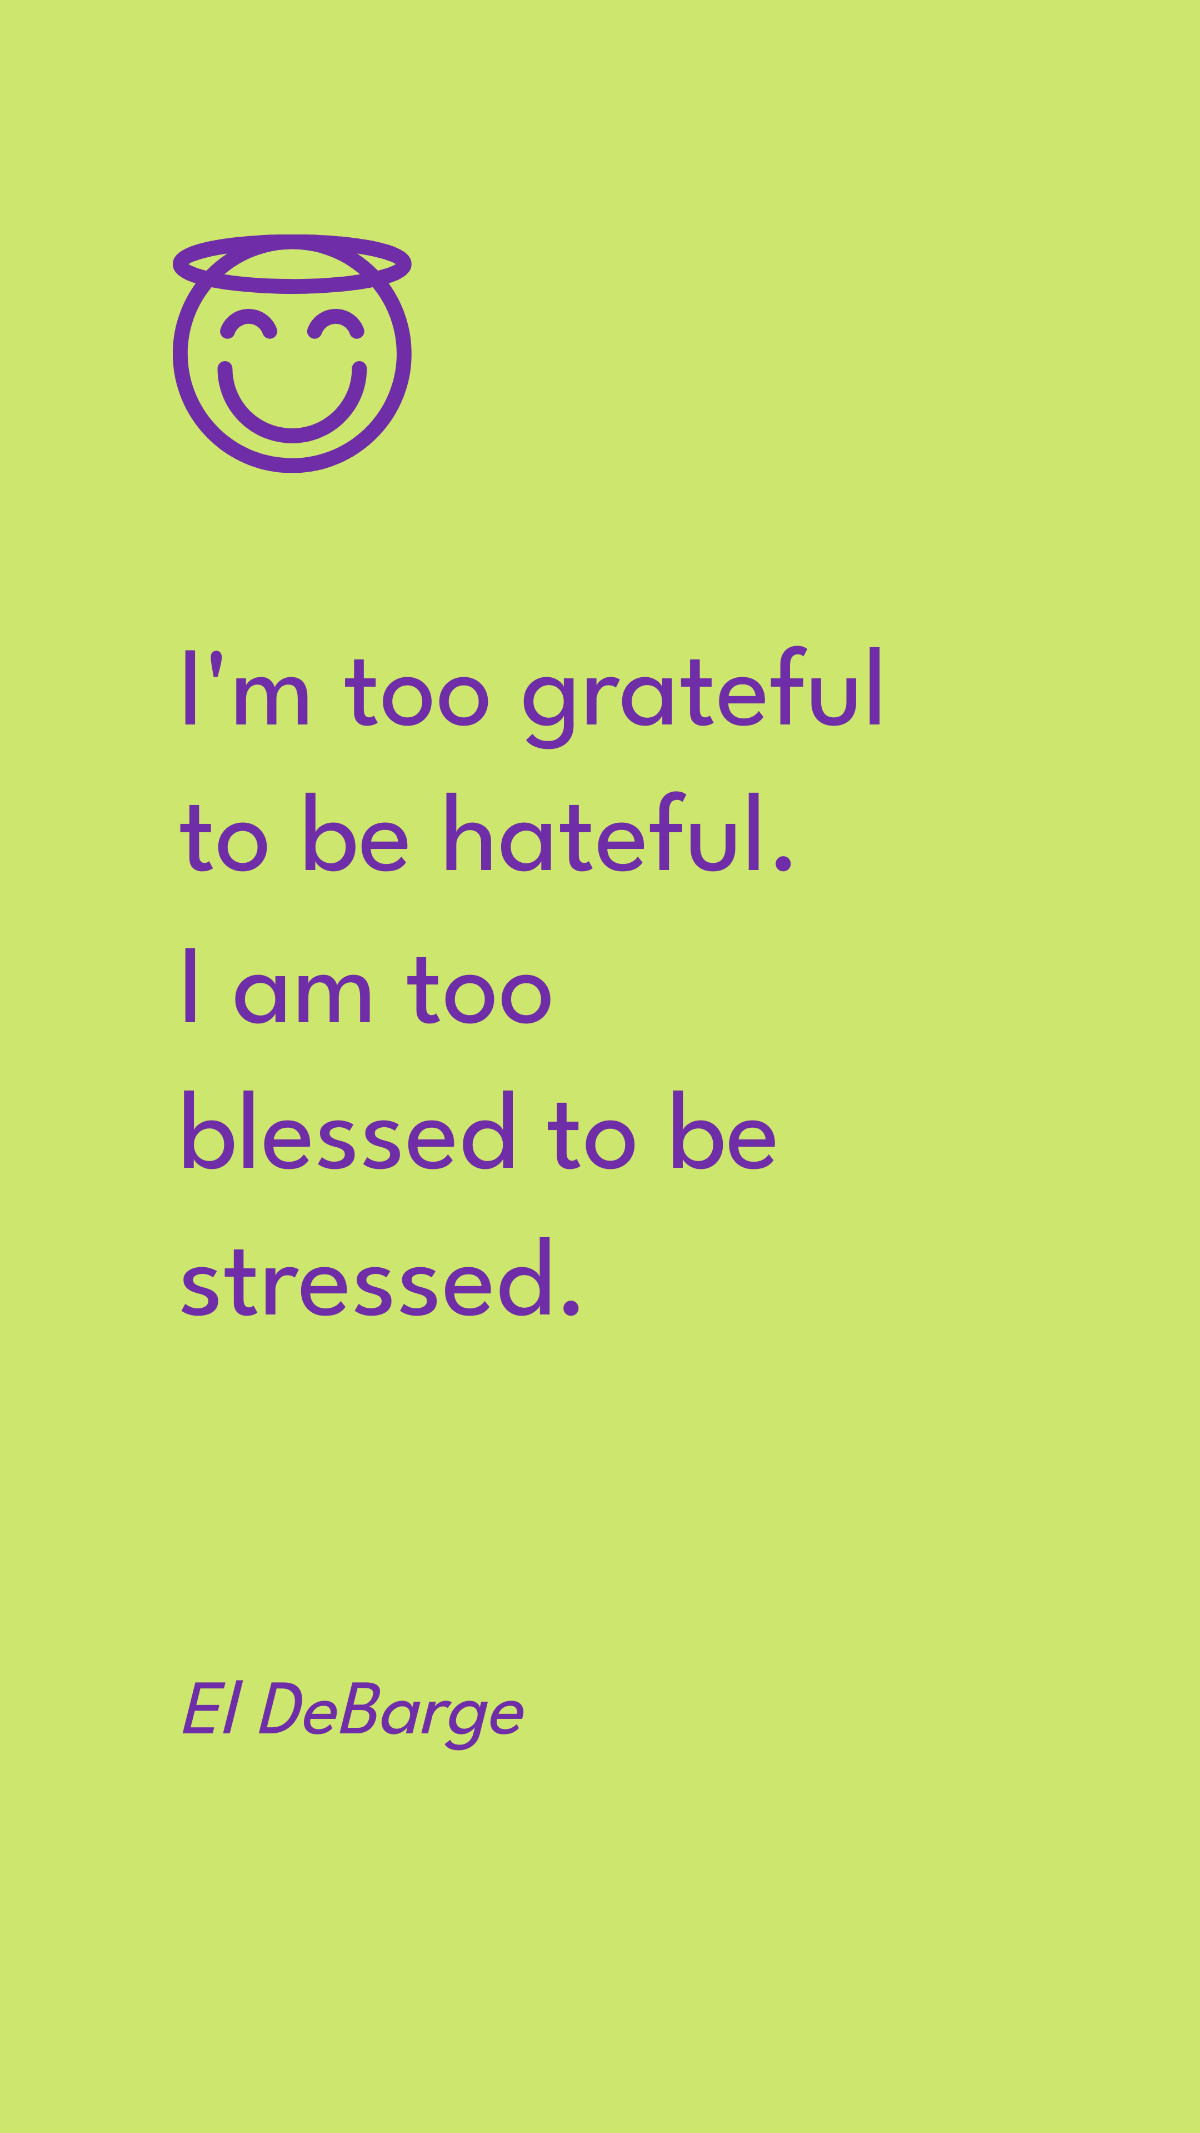 Free El DeBarge - I'm too grateful to be hateful. I am too blessed to be stressed. Template